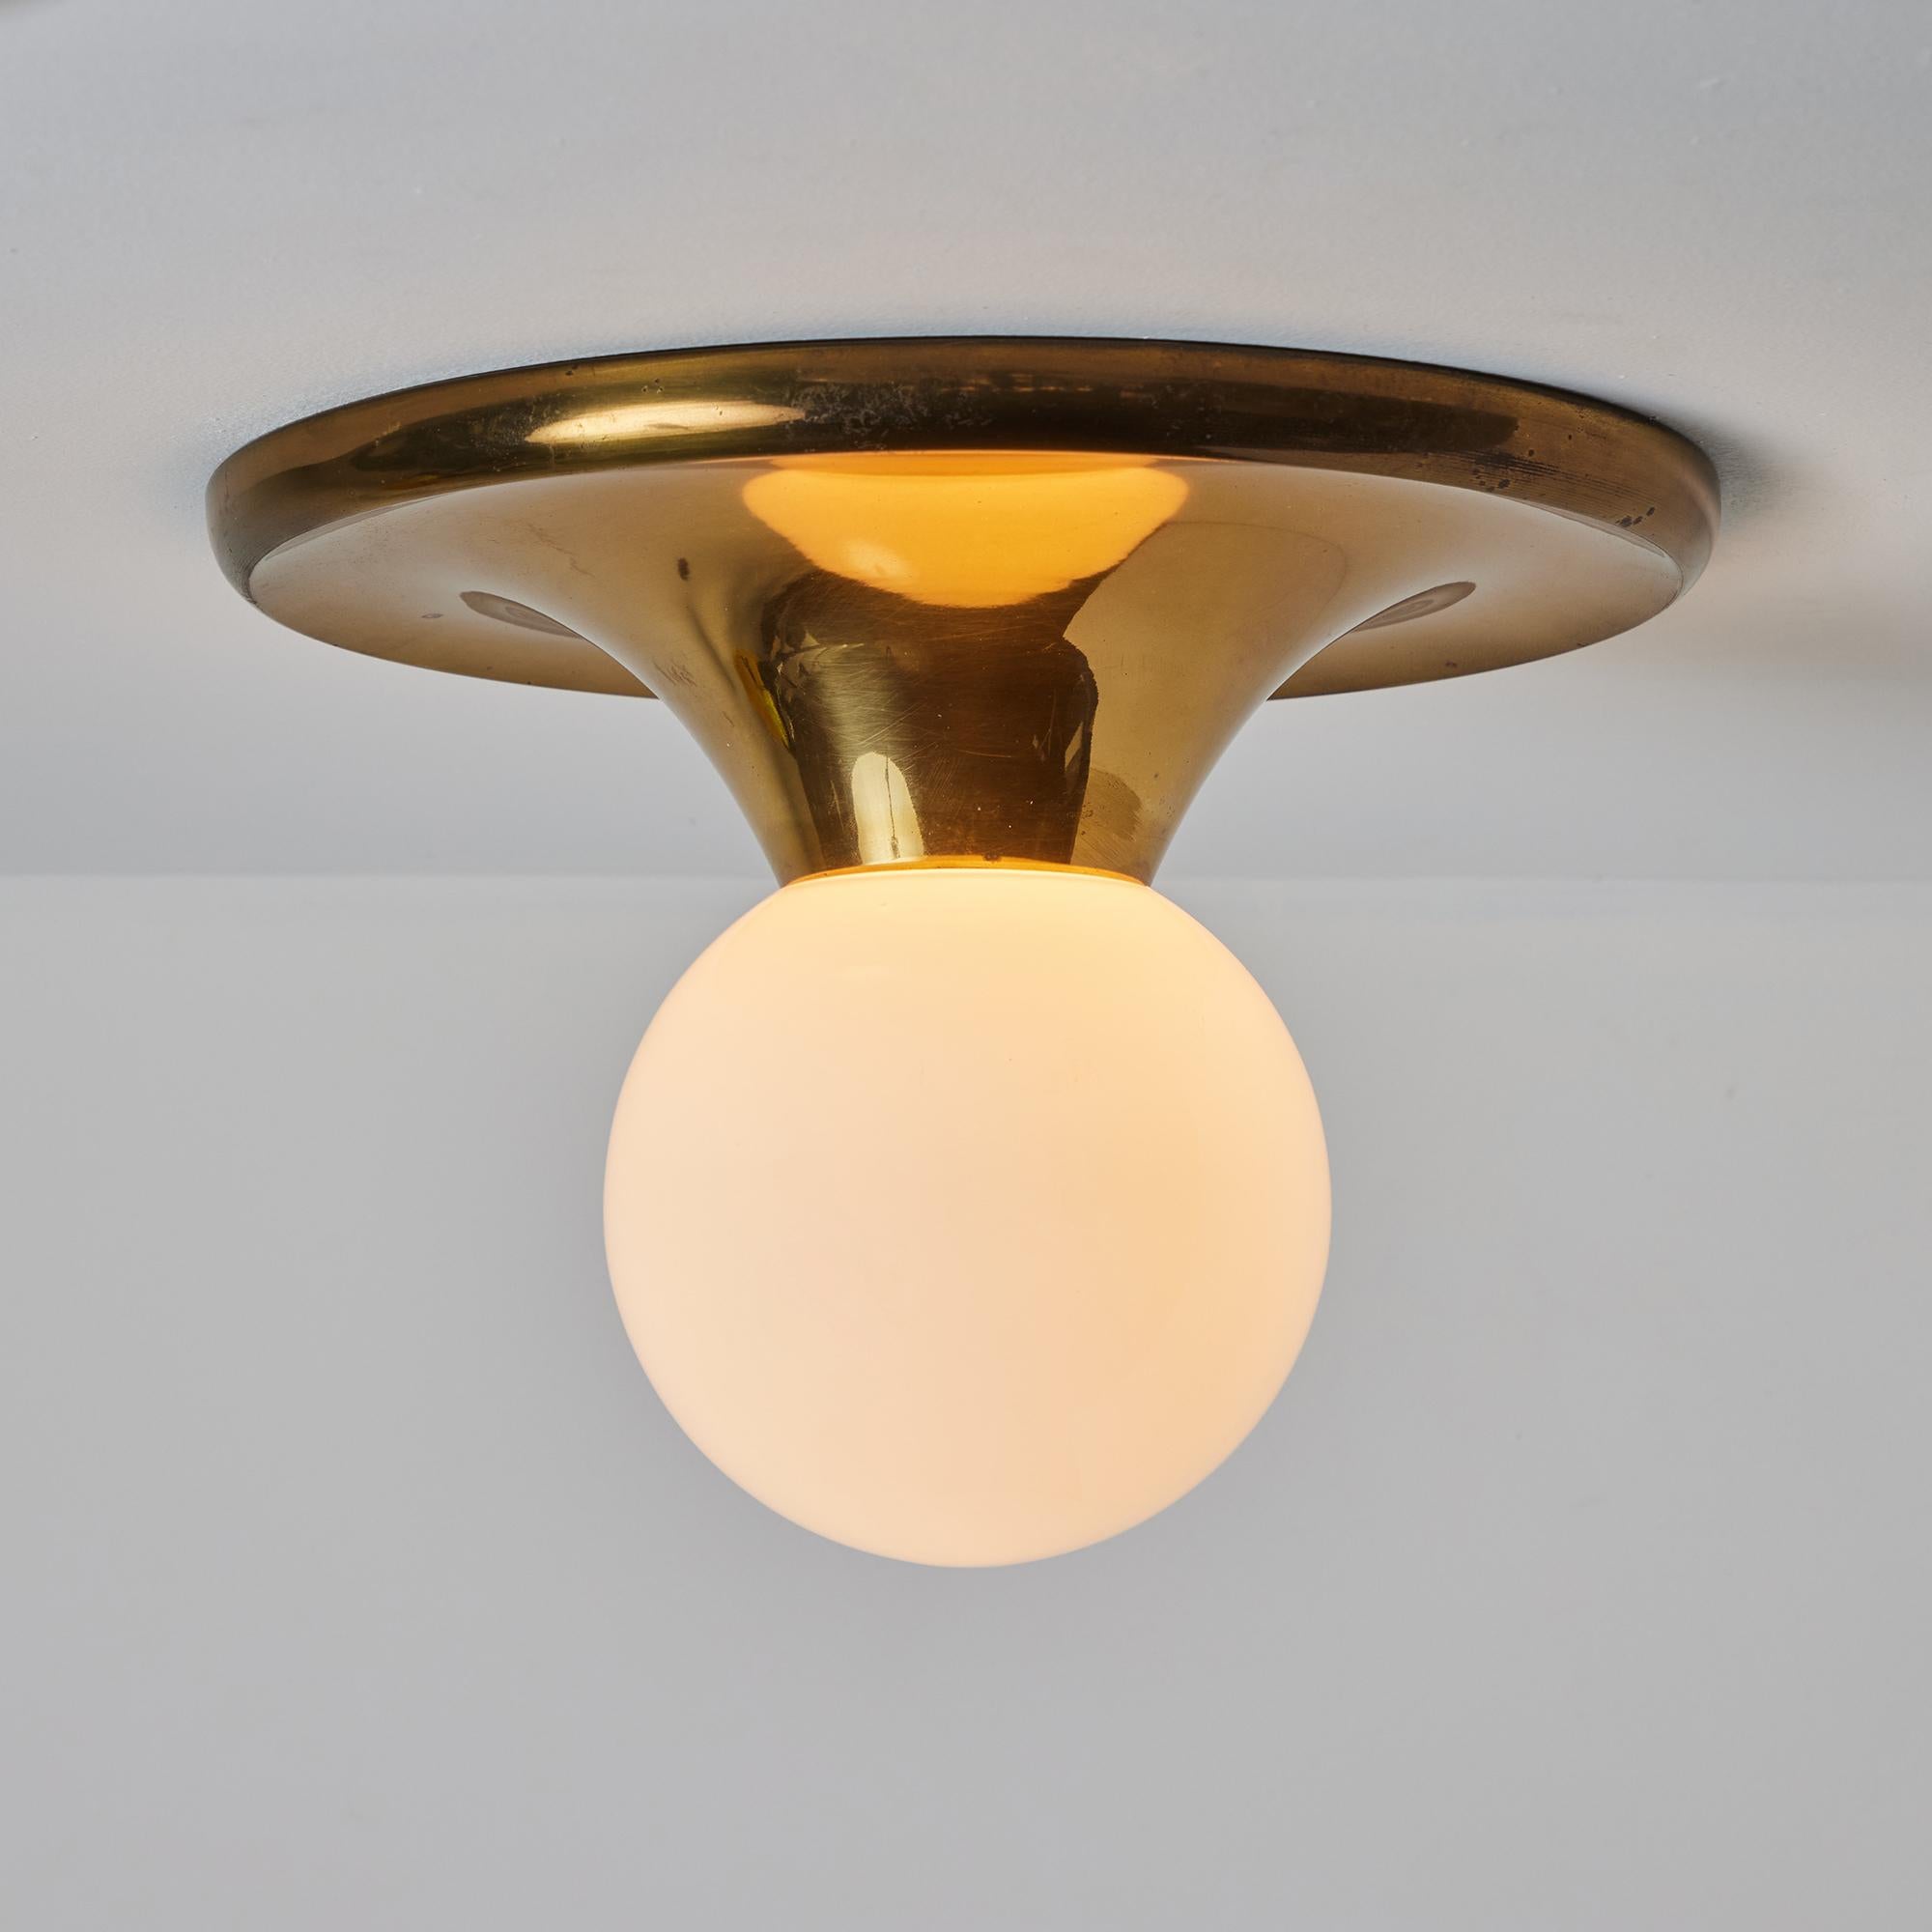 Large 1960s Achille Castiglioni & Pier Giacomo 'Light Ball' Wall or Ceiling Lamp. Designed in 1965, this rare variant is executed in attractively patinated brass and opaline glass. An incredibly refined and iconic midcentury design that is